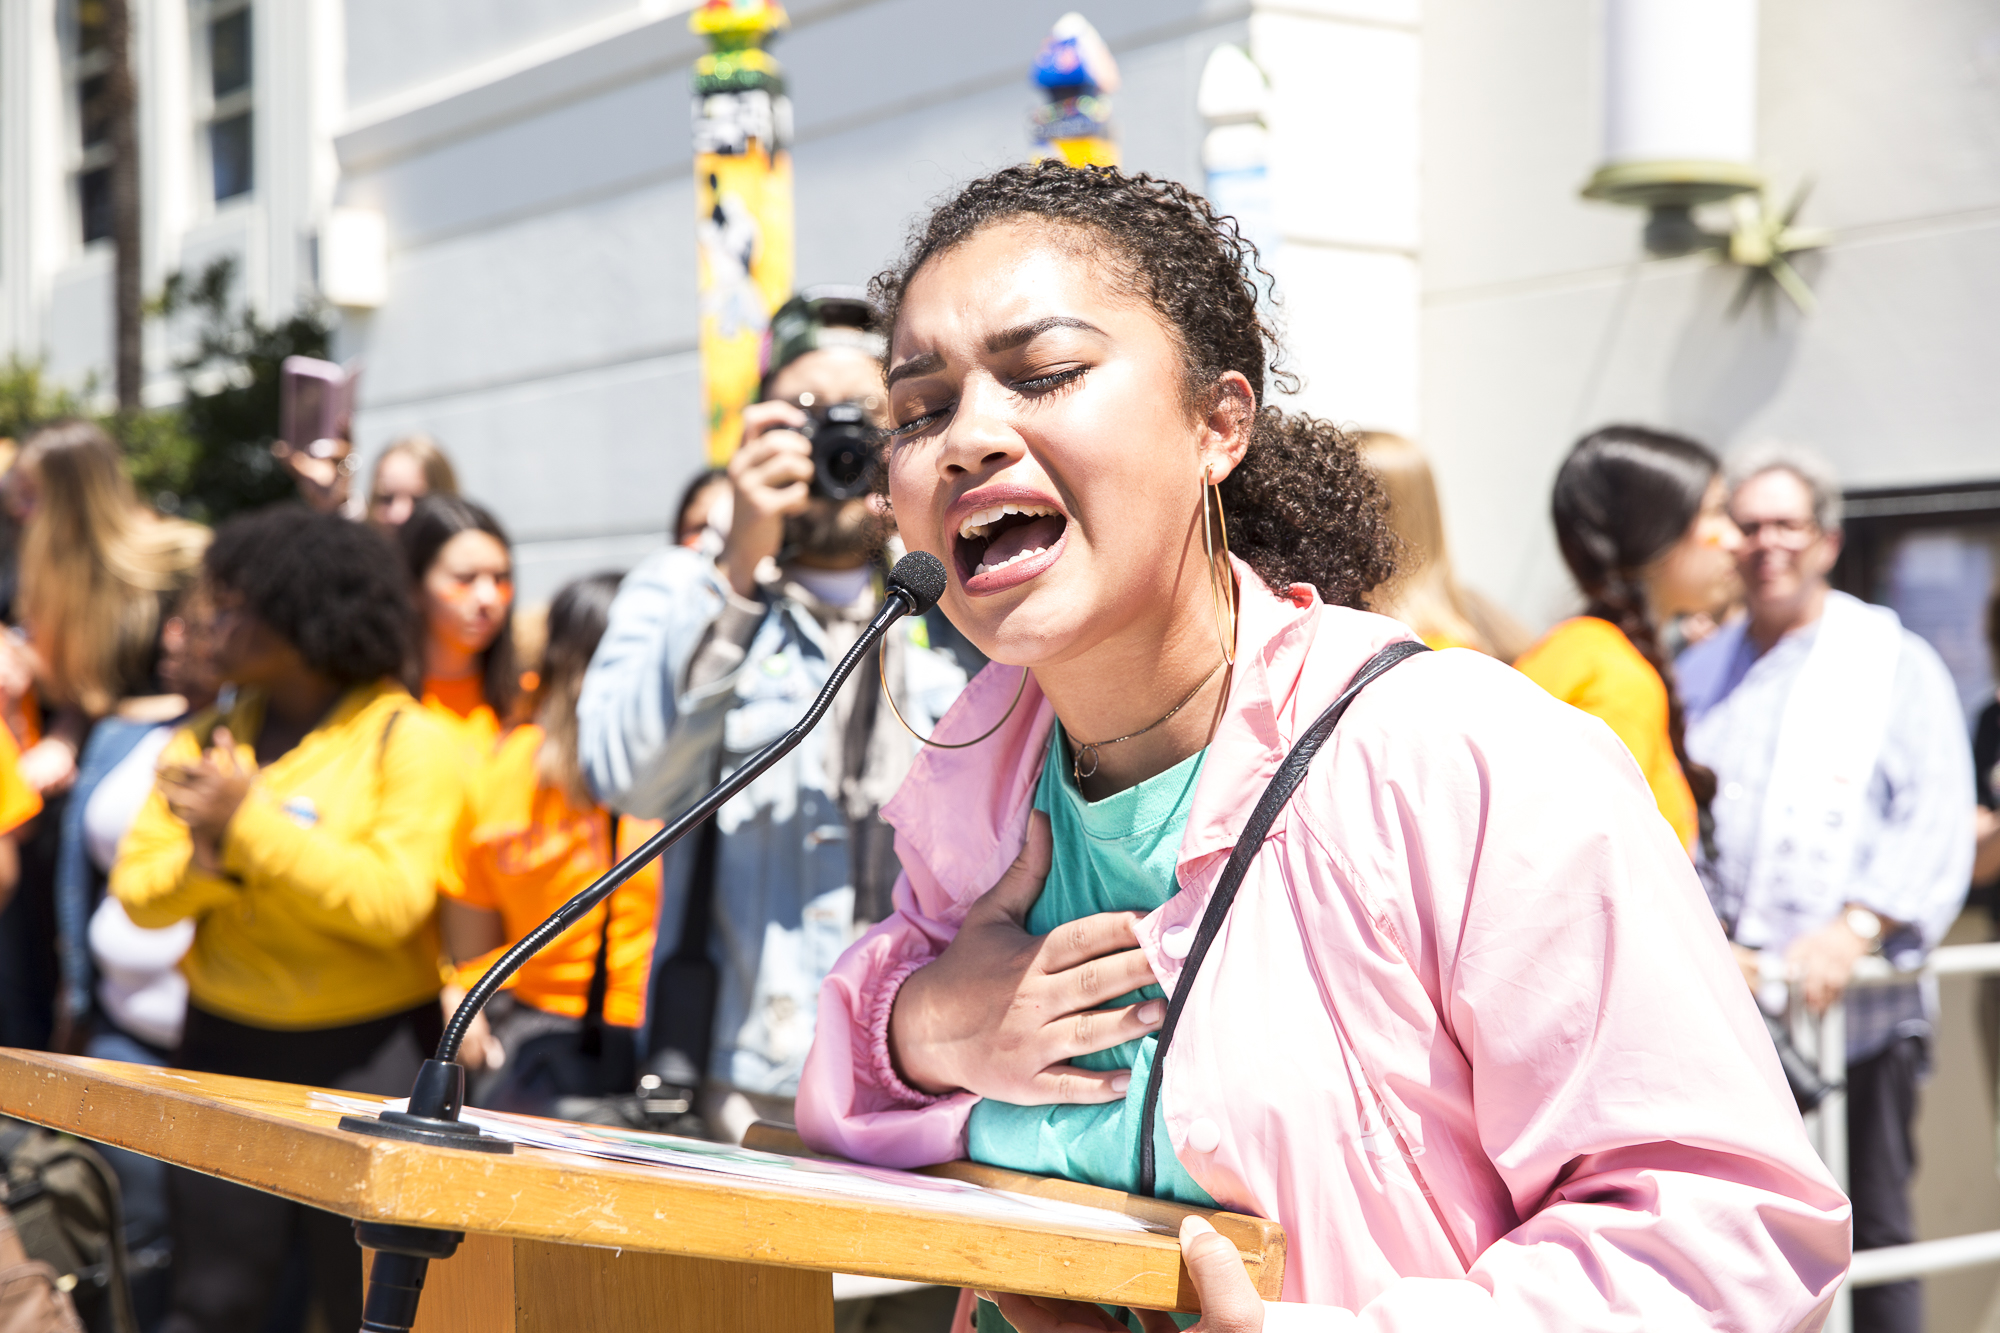  Flora Chavez (21), one of the key speakers during the student walkout that converged at Santa Monica City Hall sings a song she wrote entitled, “Peace Love Unity” to those in attendance in Santa Monica California, on Friday, April 20 2018. Several h